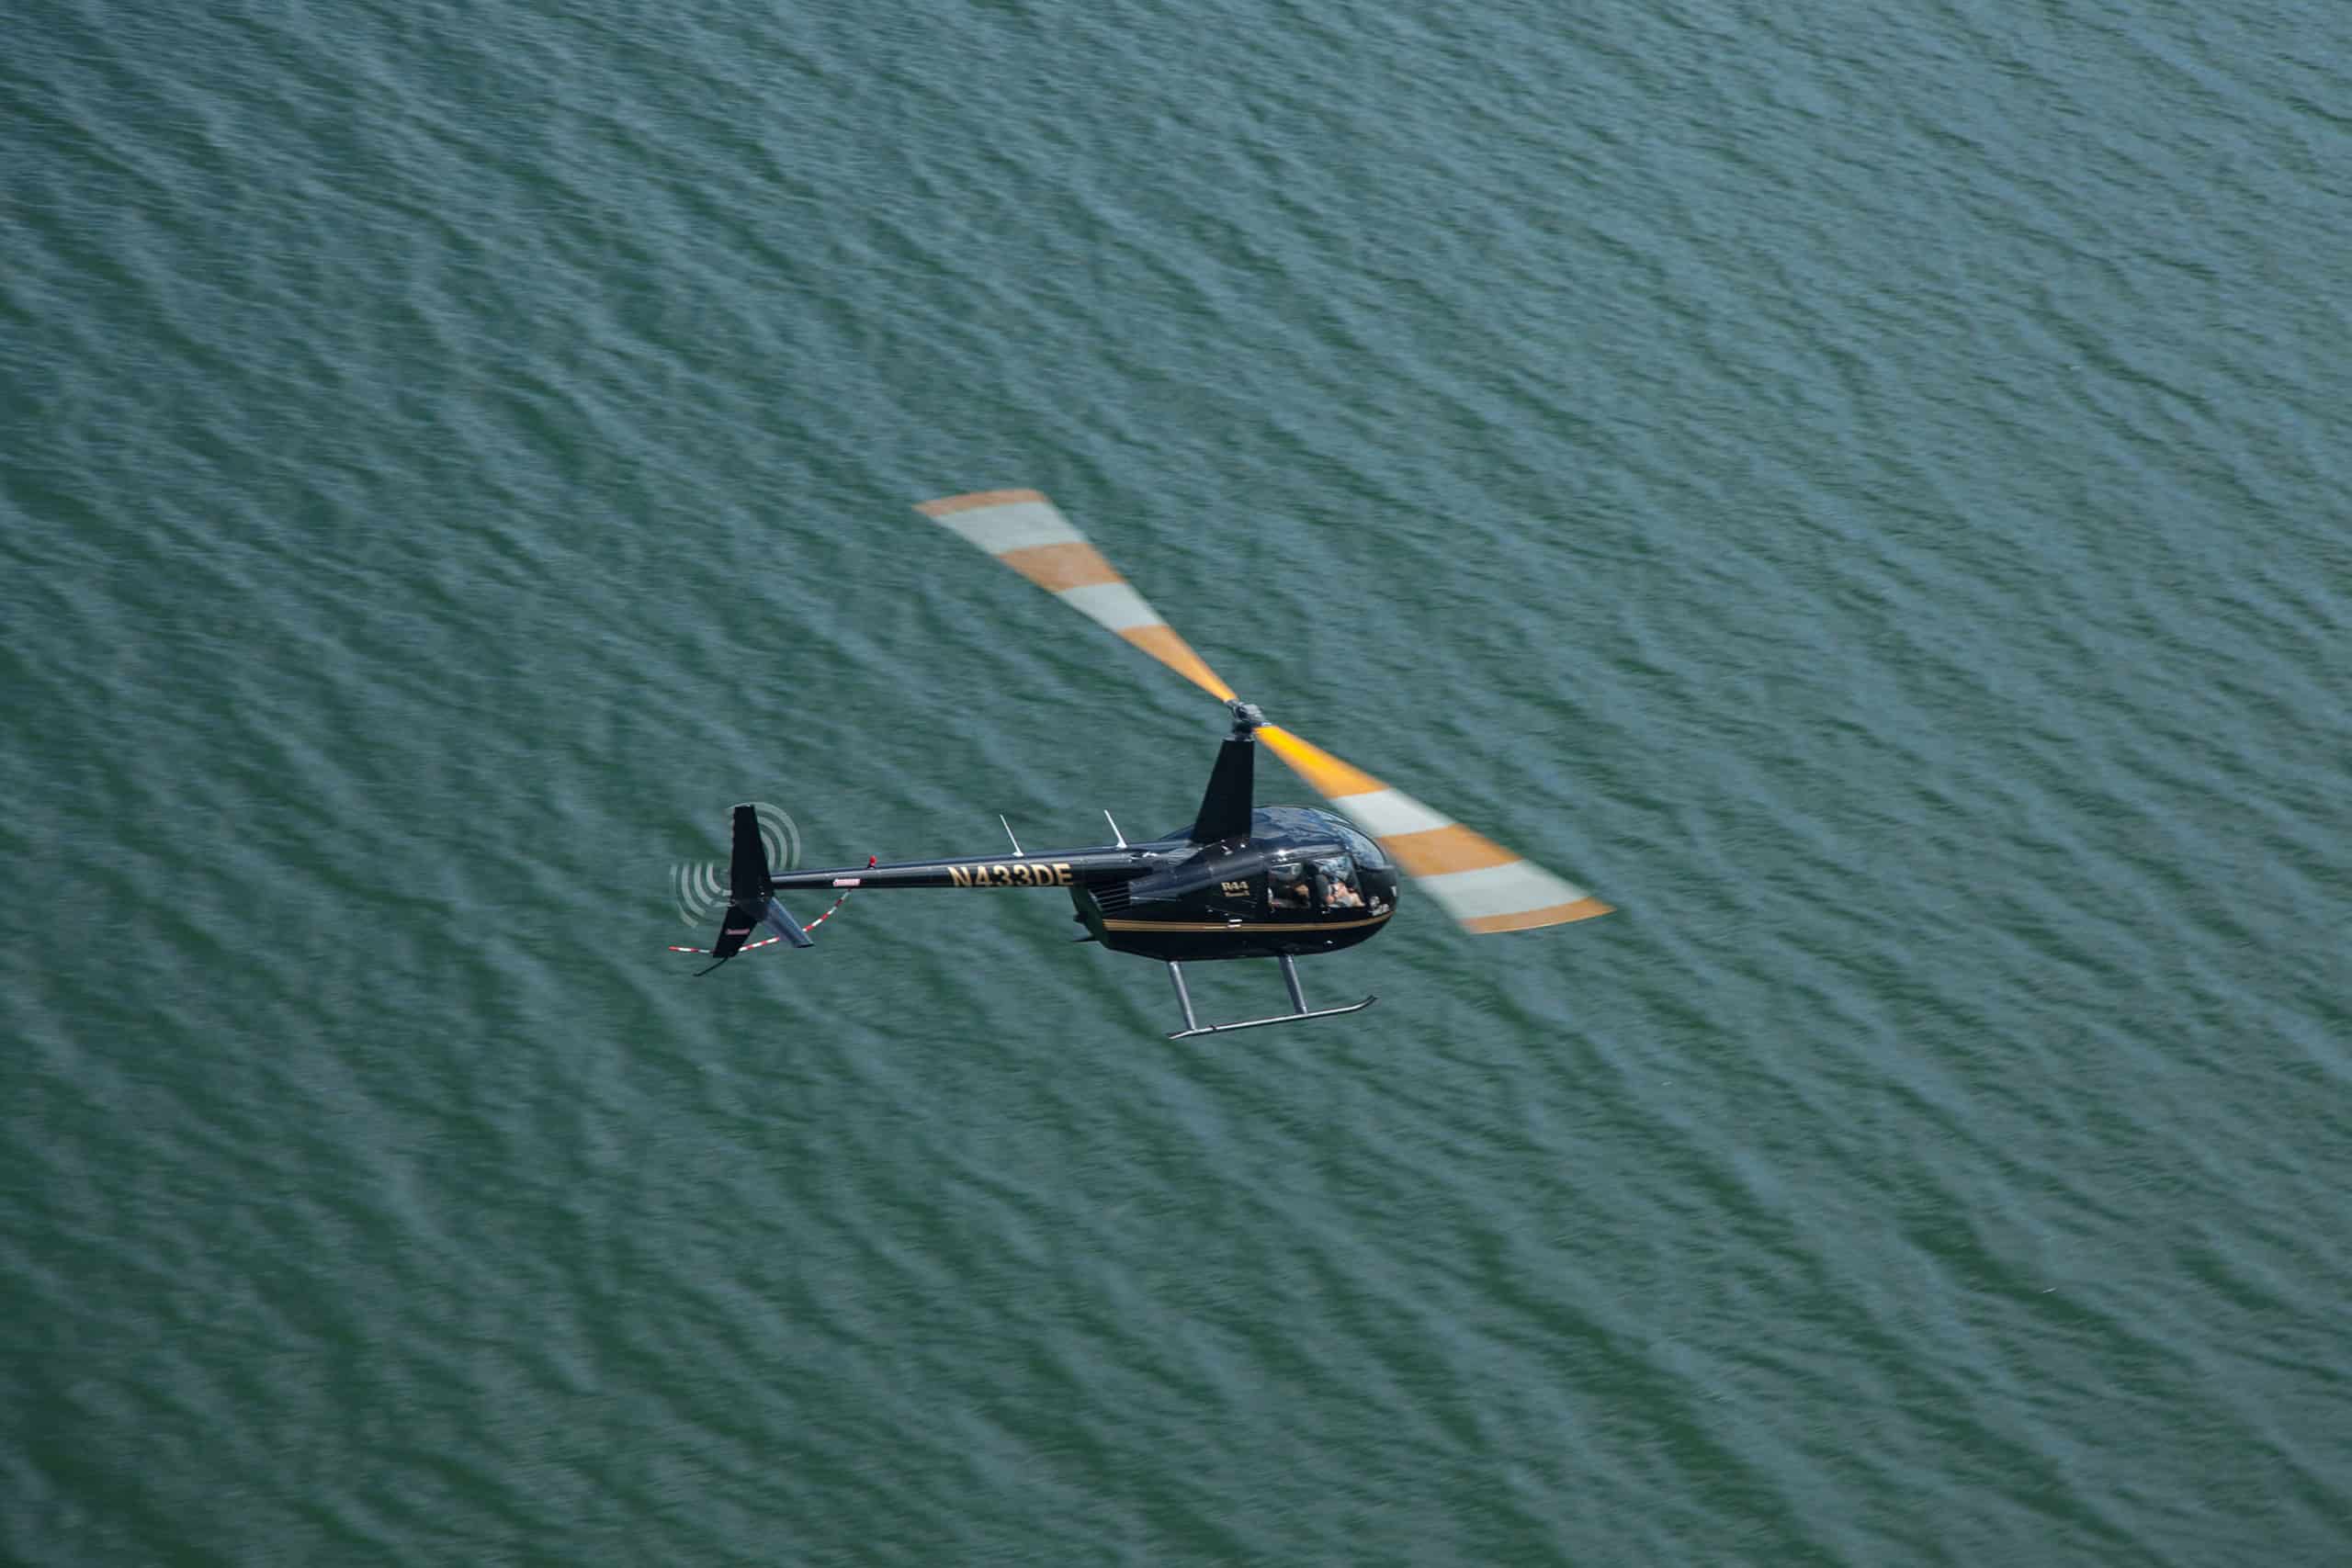 aerial view of R44 helicopter flying over water